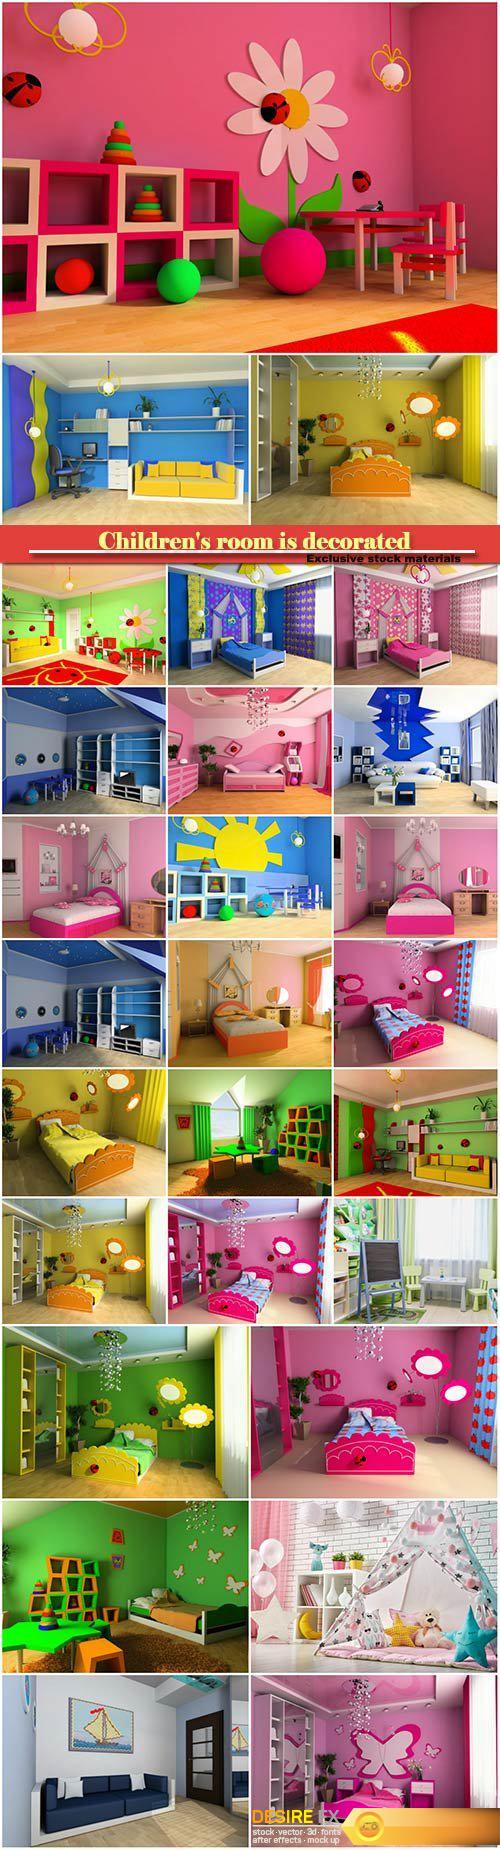 Children's room is decorated in pink, blue and green tones